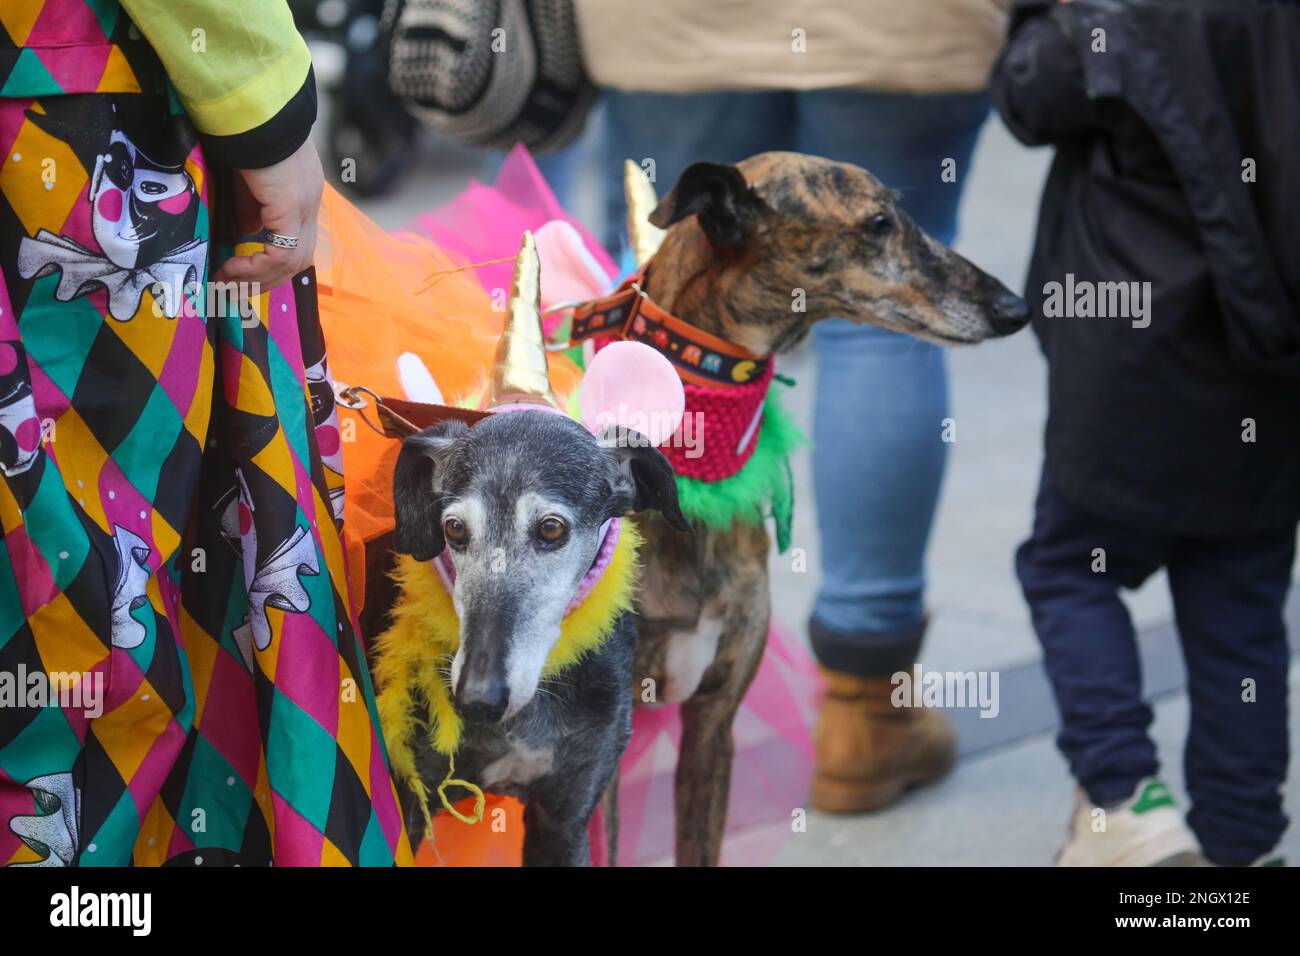 Aviles, Spain, 19th February, 2023: Two greyhounds in costume during the Antroxaes Mascot Contest on February 18, 2023, in Aviles, Spain. Credit: Alberto Brevers / Alamy Live News Stock Photo